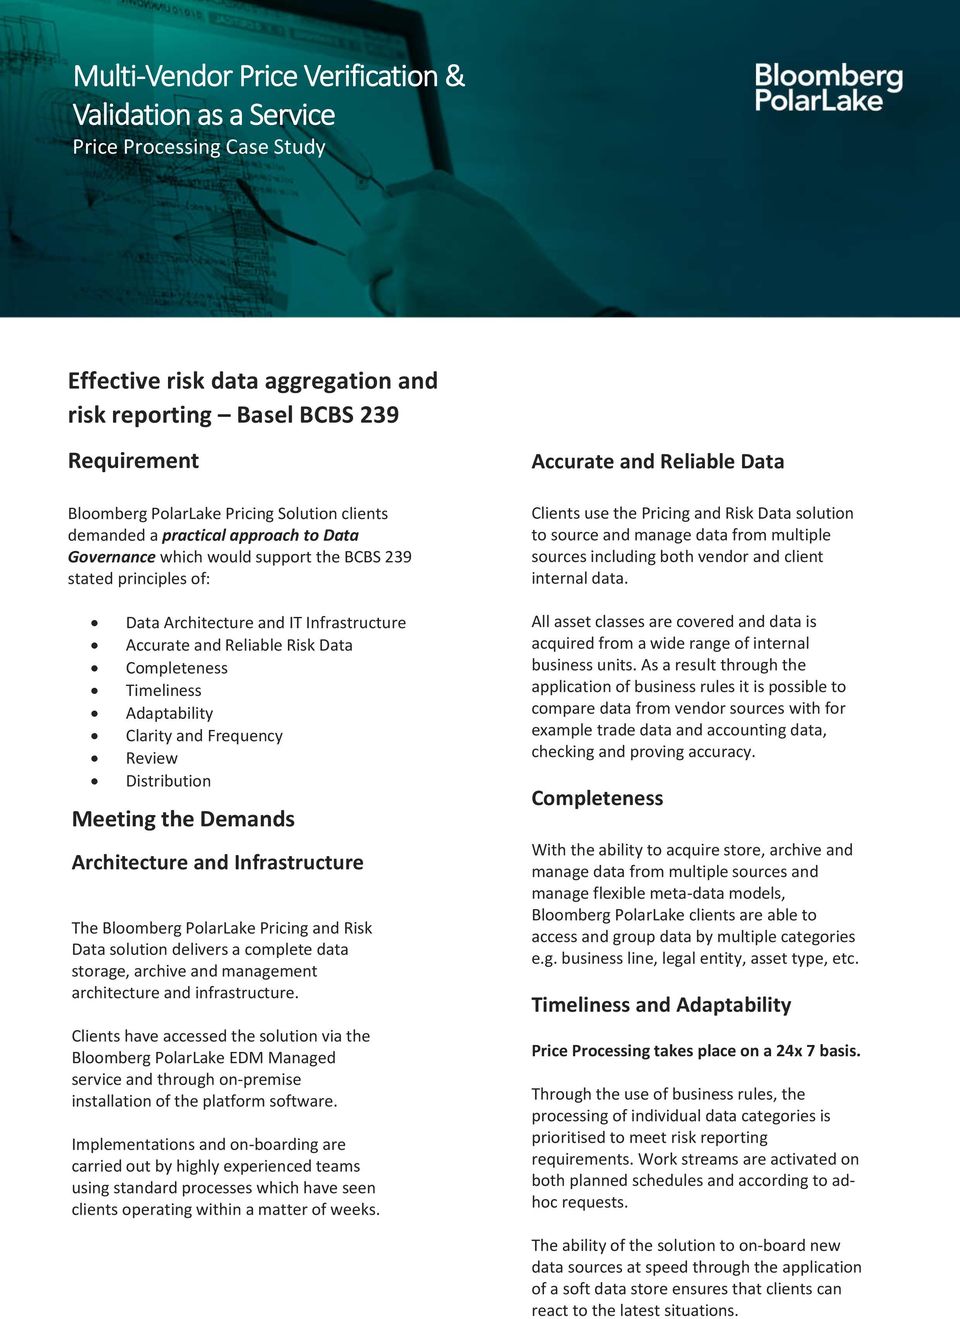 Demands Architecture and Infrastructure The Bloomberg PolarLake Pricing and Risk Data solution delivers a complete data storage, archive and management architecture and infrastructure.